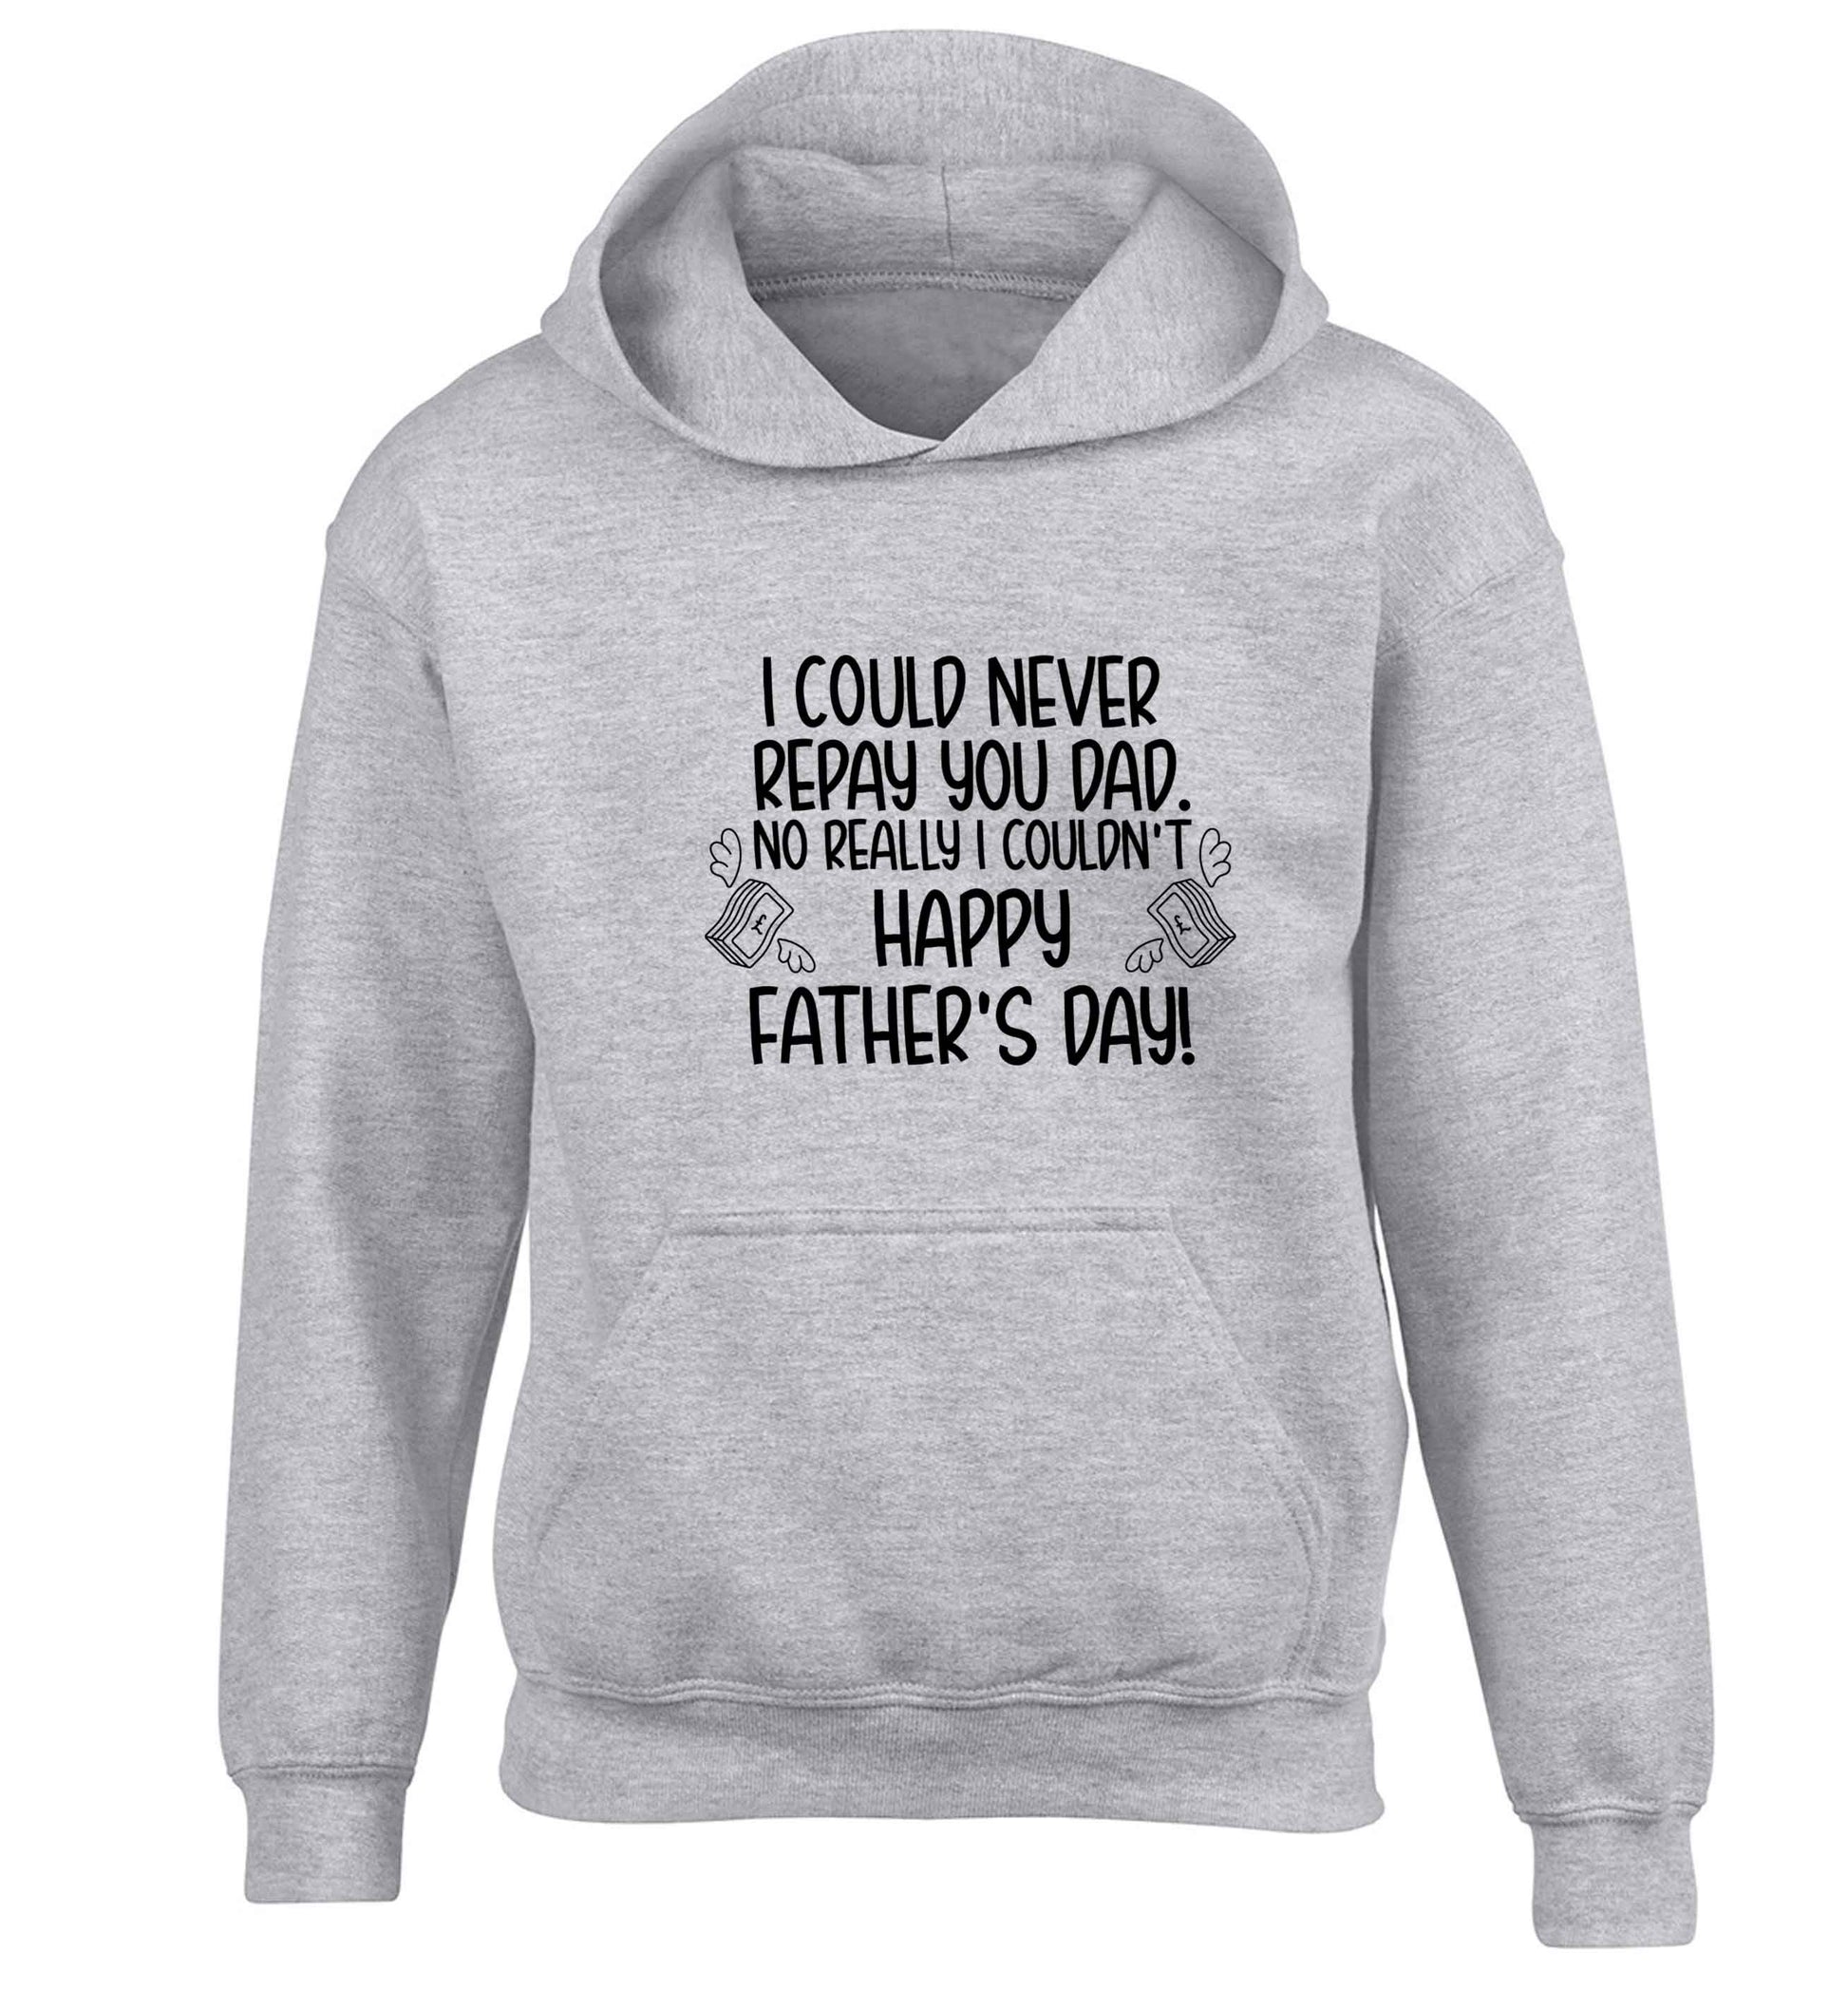 I could never repay you dad. No I really couldn't happy Father's day! children's grey hoodie 12-13 Years